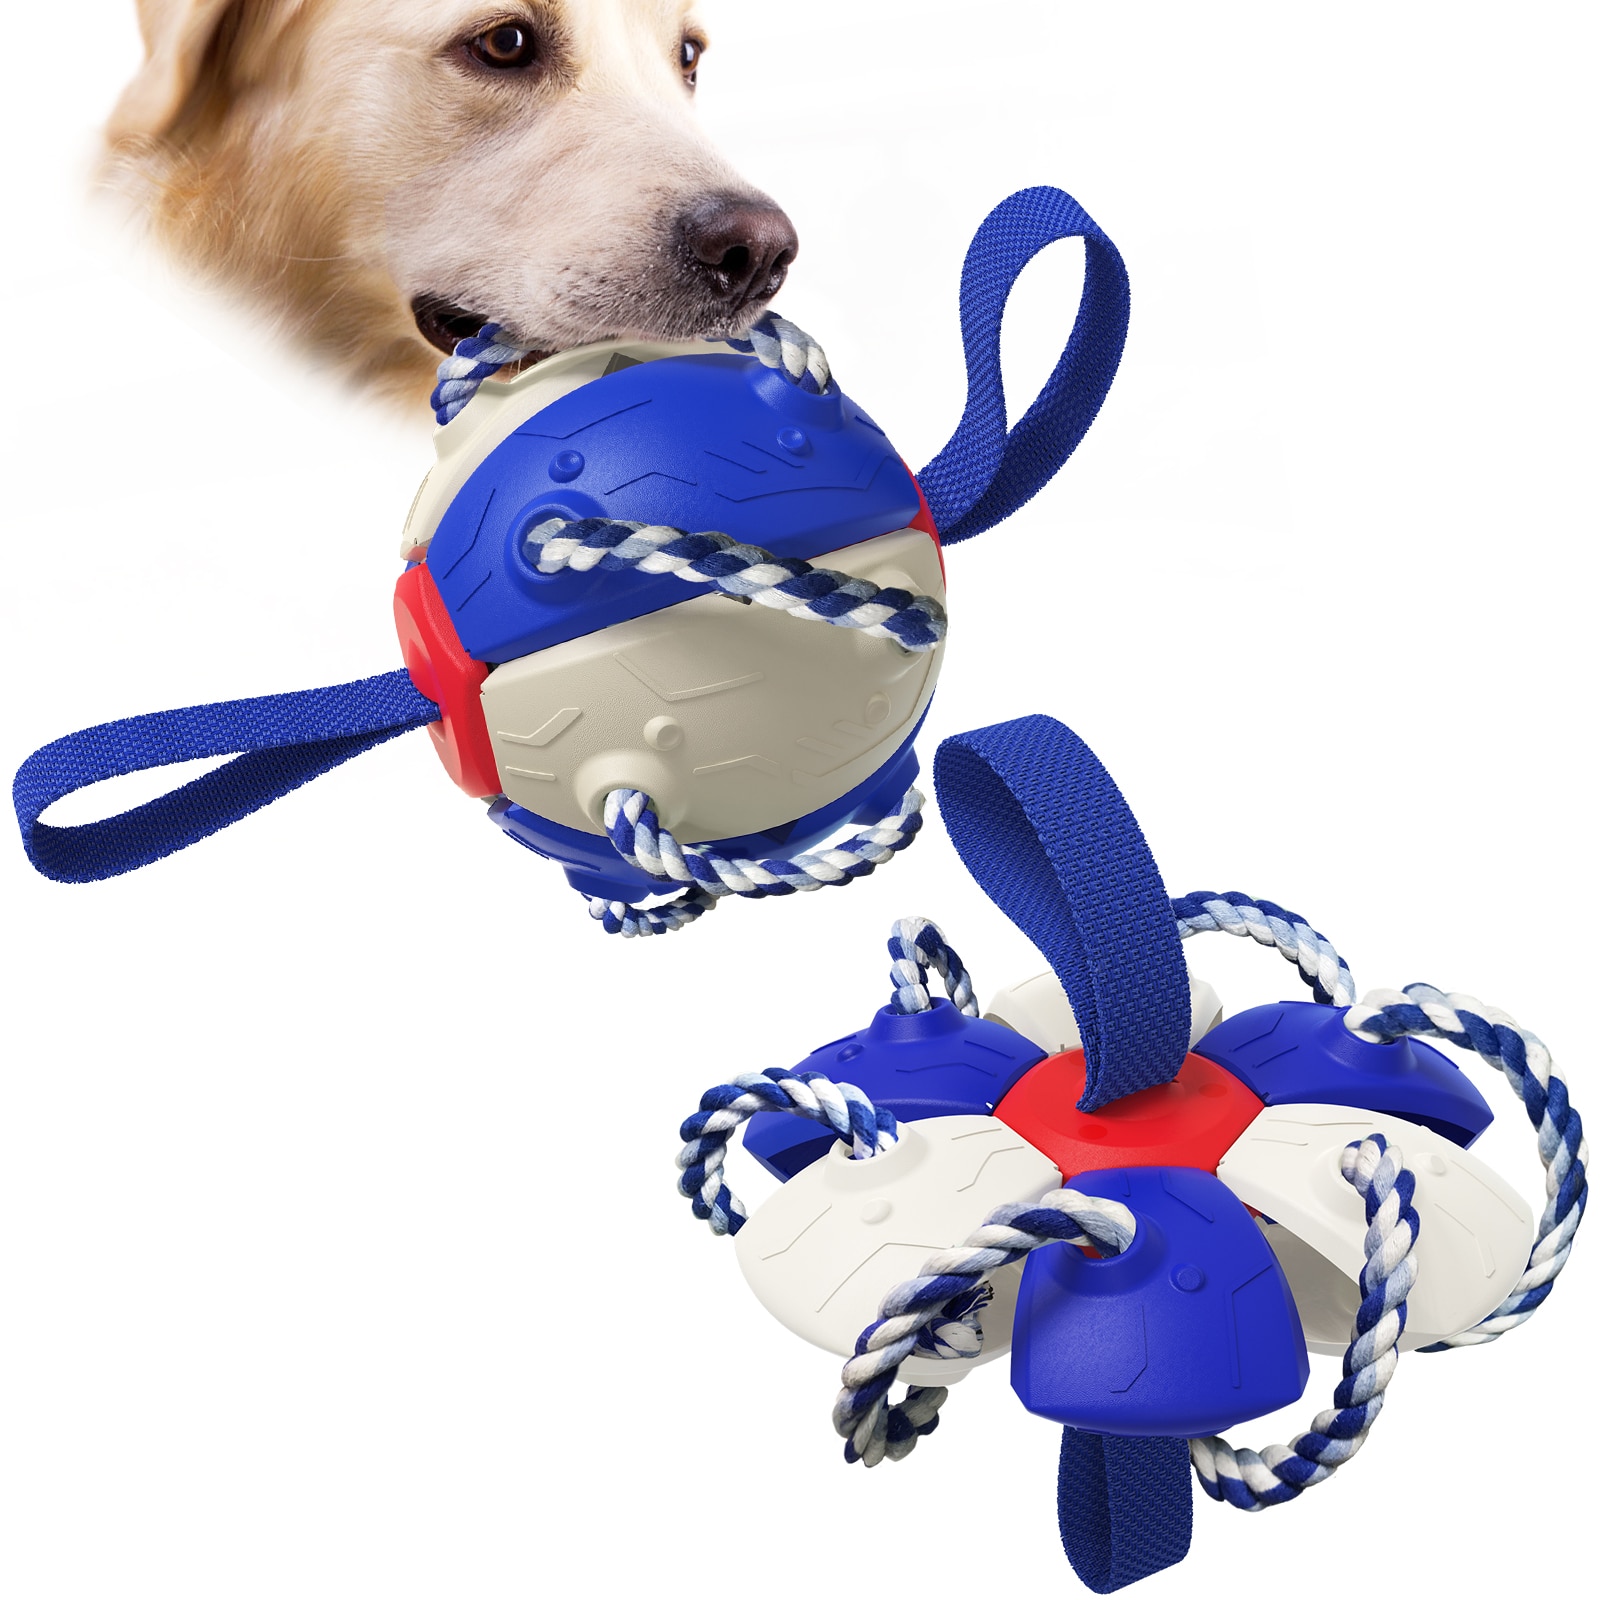 Training Toys For Dogs - Increase Interaction And Mobility